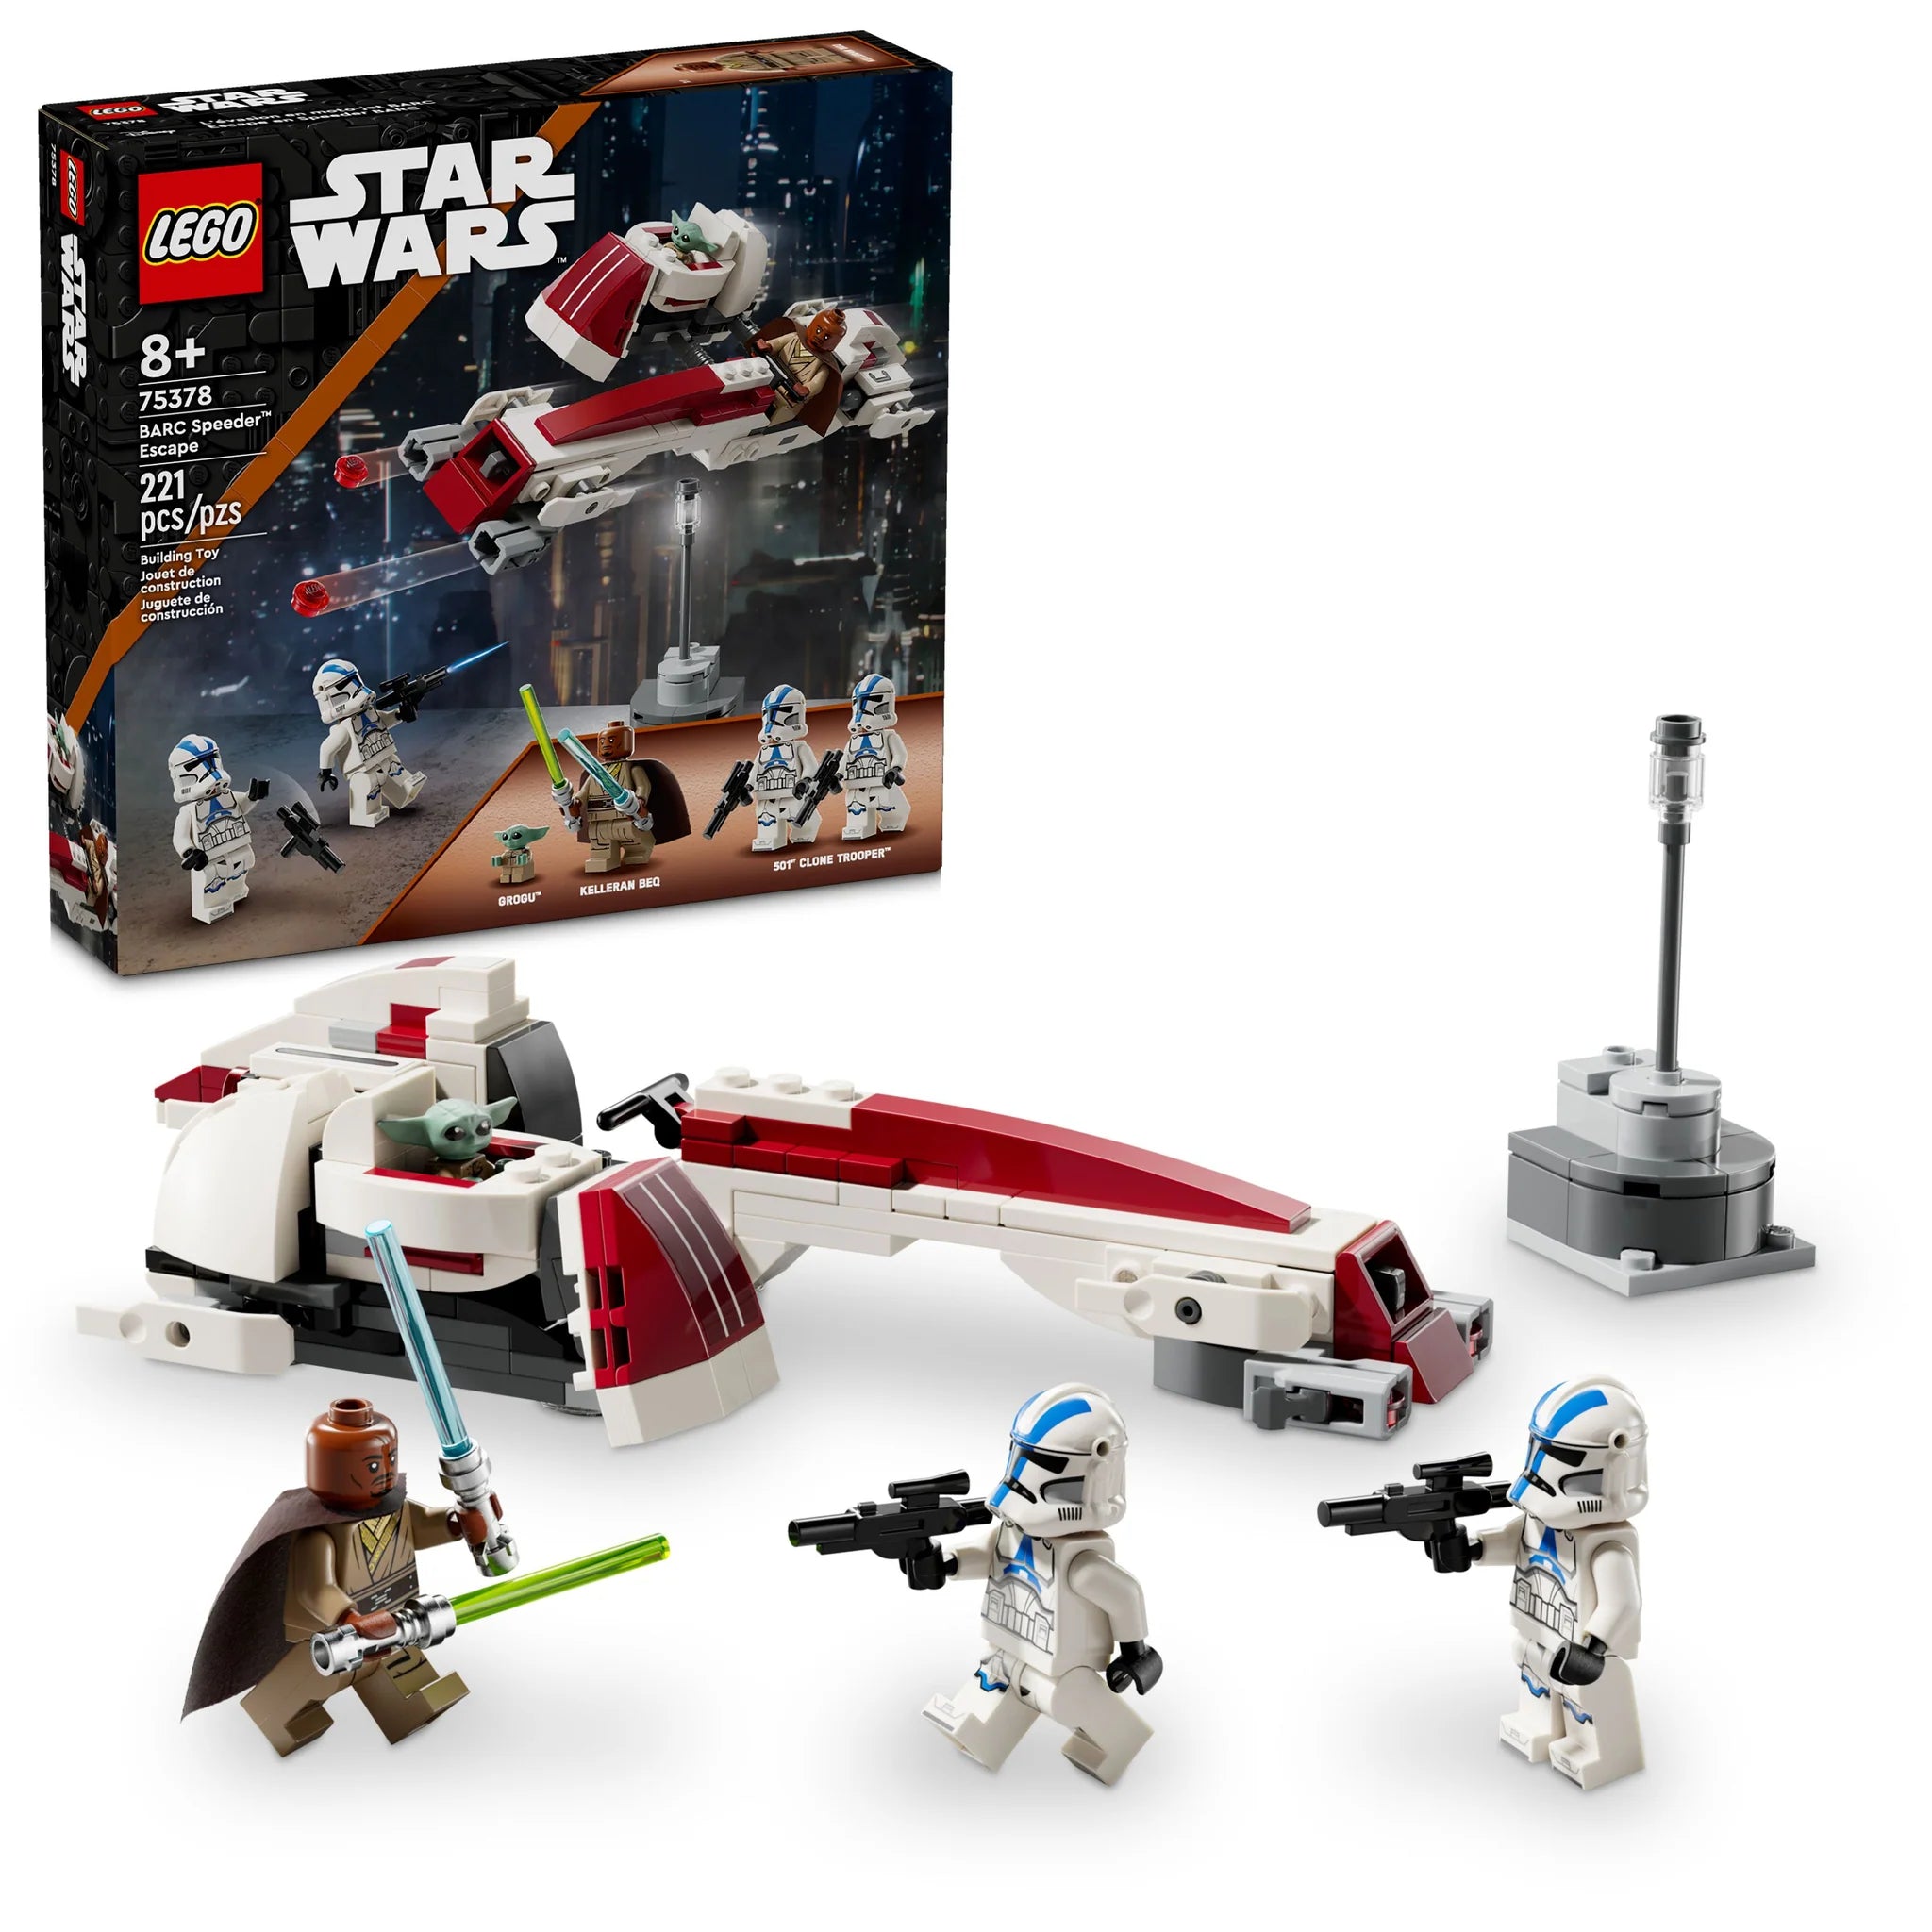 COMING MAY 1ST!! BARC Speeder Escape - LEGO Star Wars Set (75378)